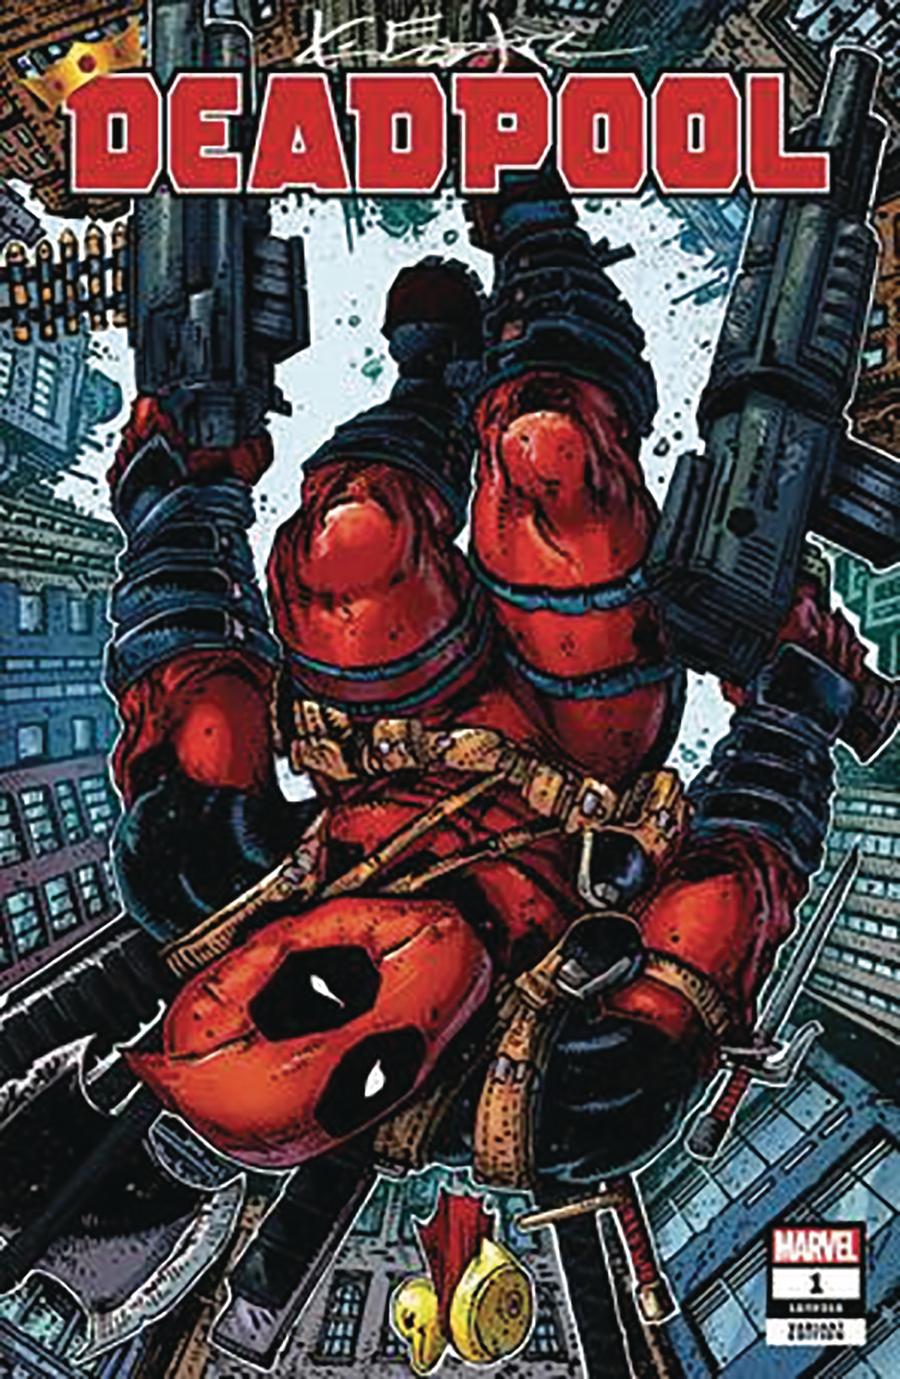 Deadpool Vol 7 #1 Cover L Clover Press Exclusive Kevin Eastman Variant Cover Signed By Kevin Eastman